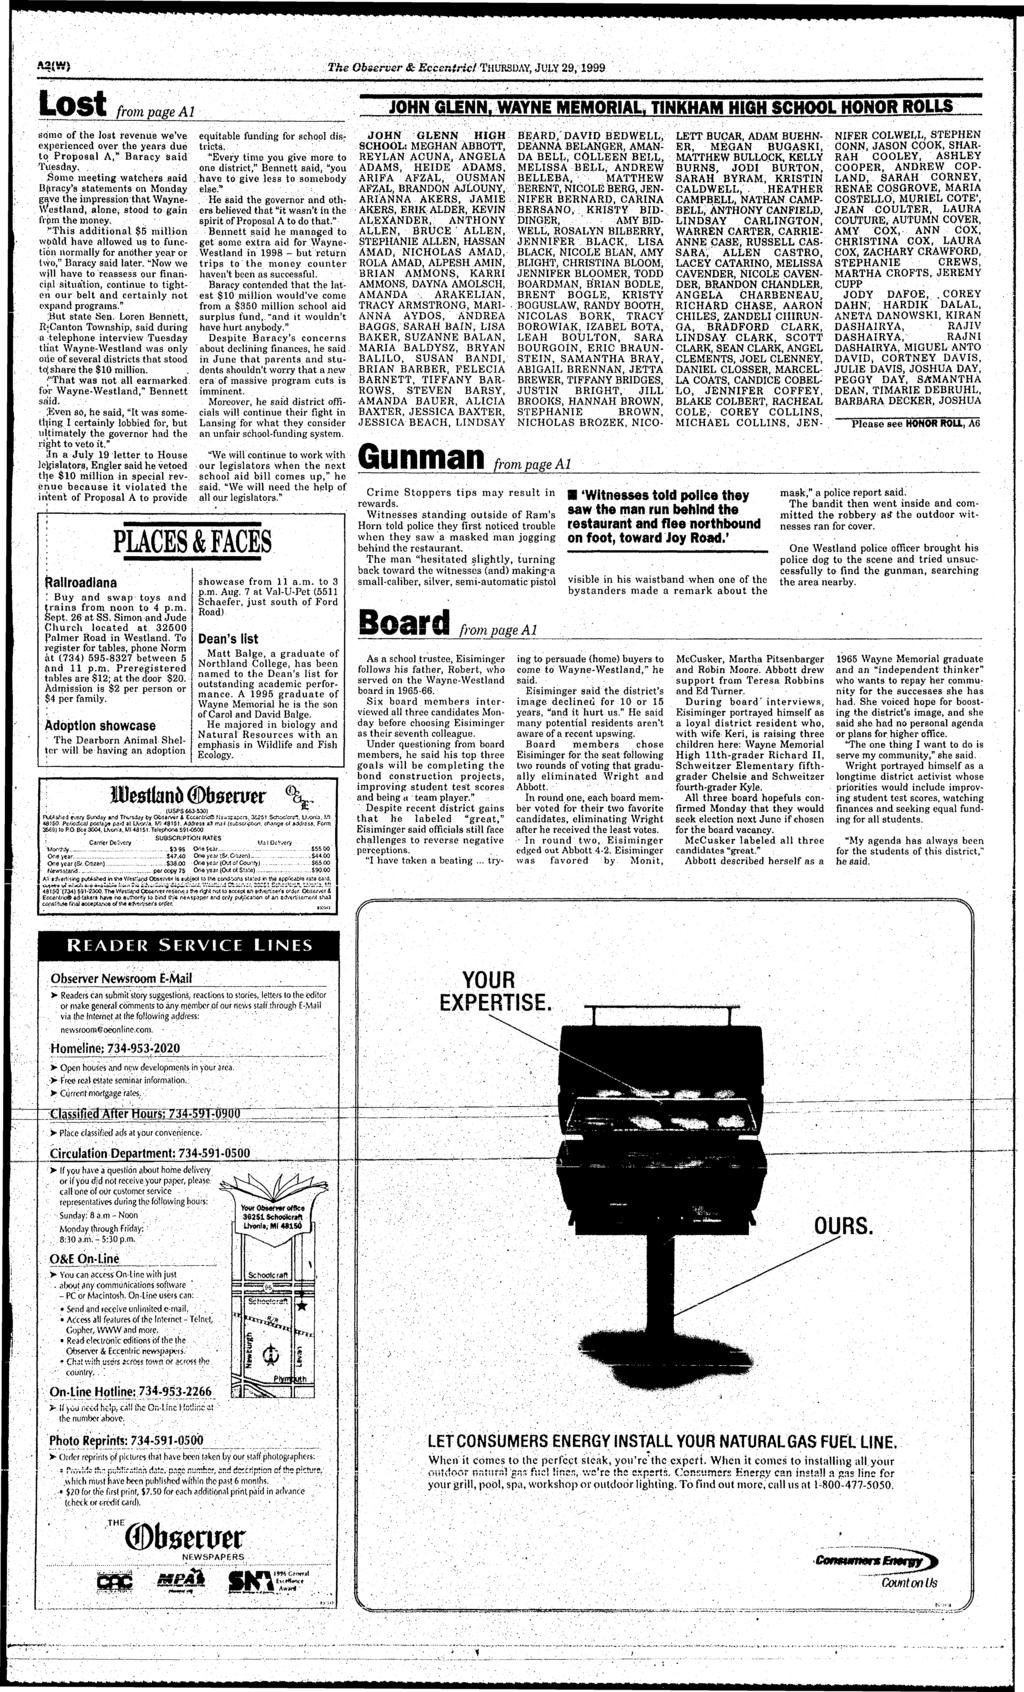 A2(W) The Observer &Eceenirlct THURSDAY, JULY 29,1999 from page Al sqme of the lost revenue we've experienced over the years due to Proposal A,* Baracy said Tuesday.